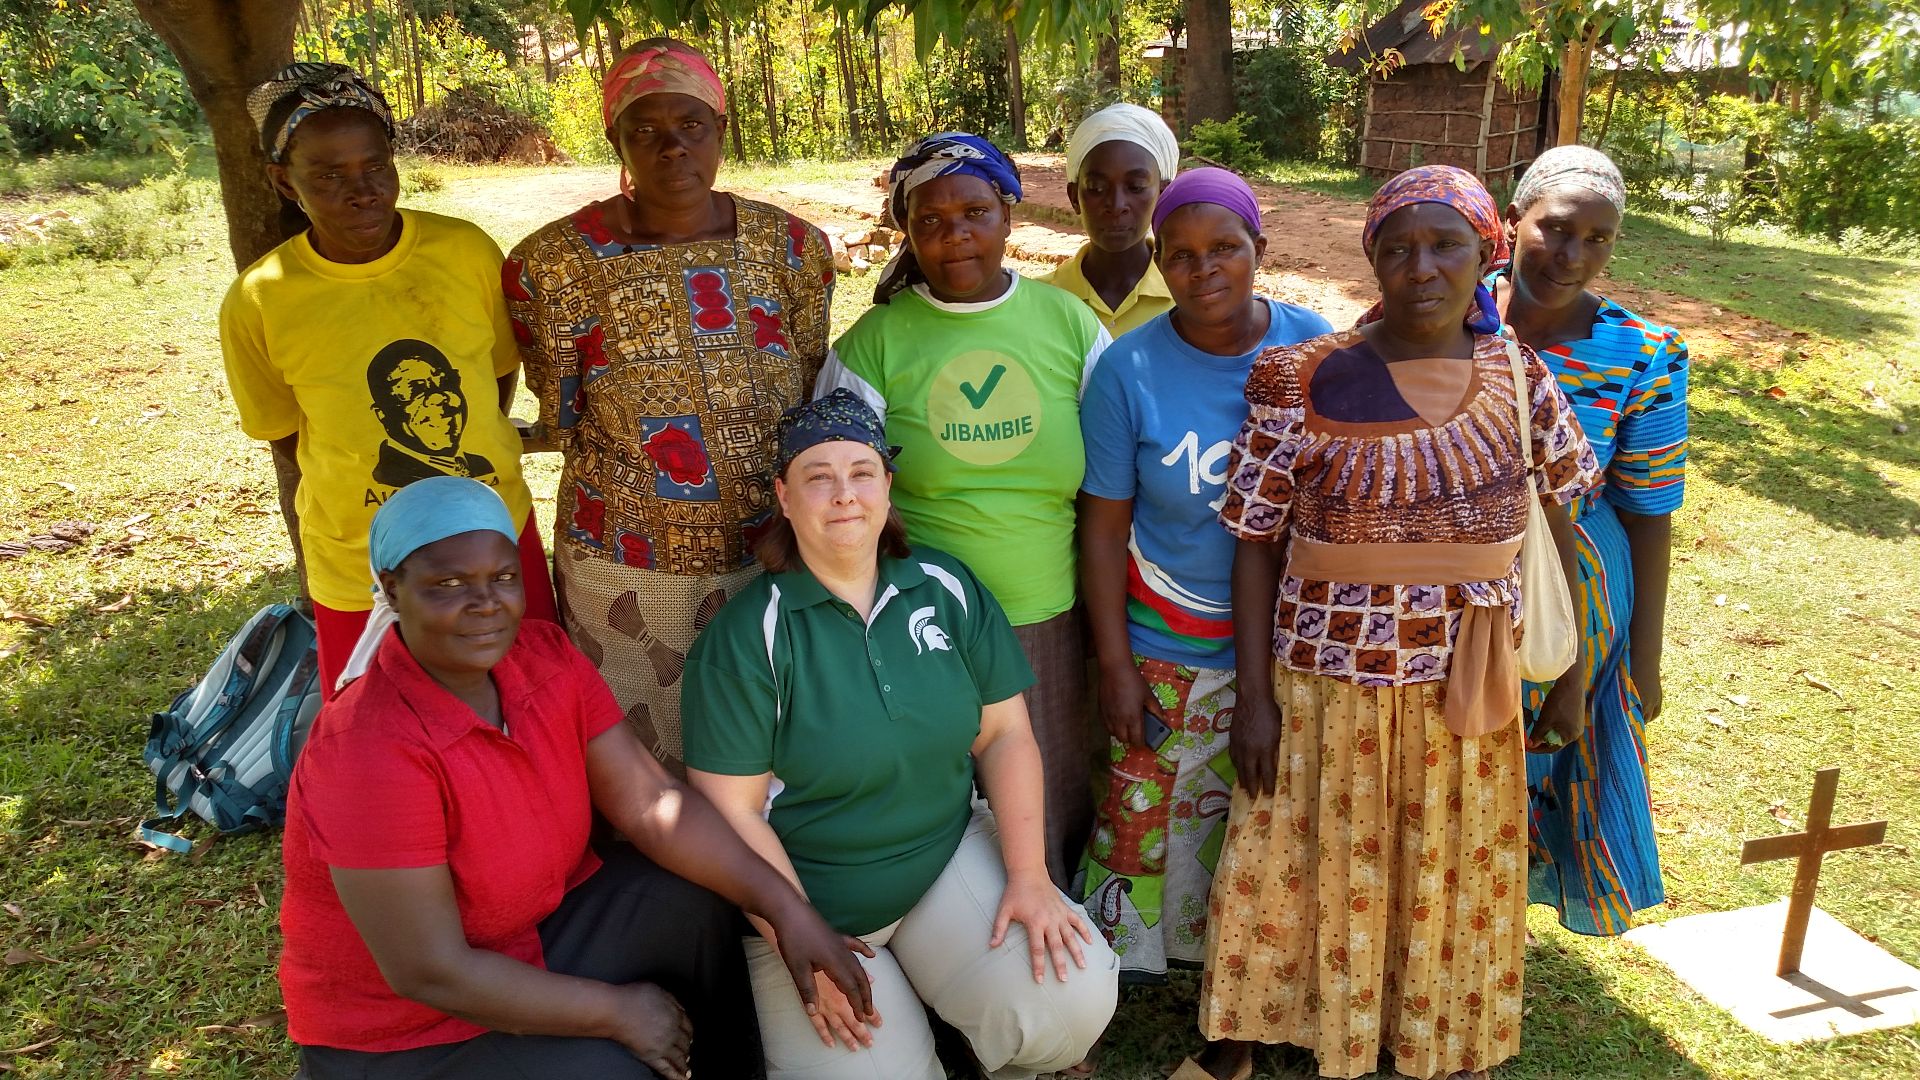 A group of nine women pose together for the camera outdoors. The eight Kenyan women are wearing a variety of colorful clothing and headwraps, with Lisa Tiemann on the left wearing a green Spartan shirt, holding hands with a woman in a red shirt.